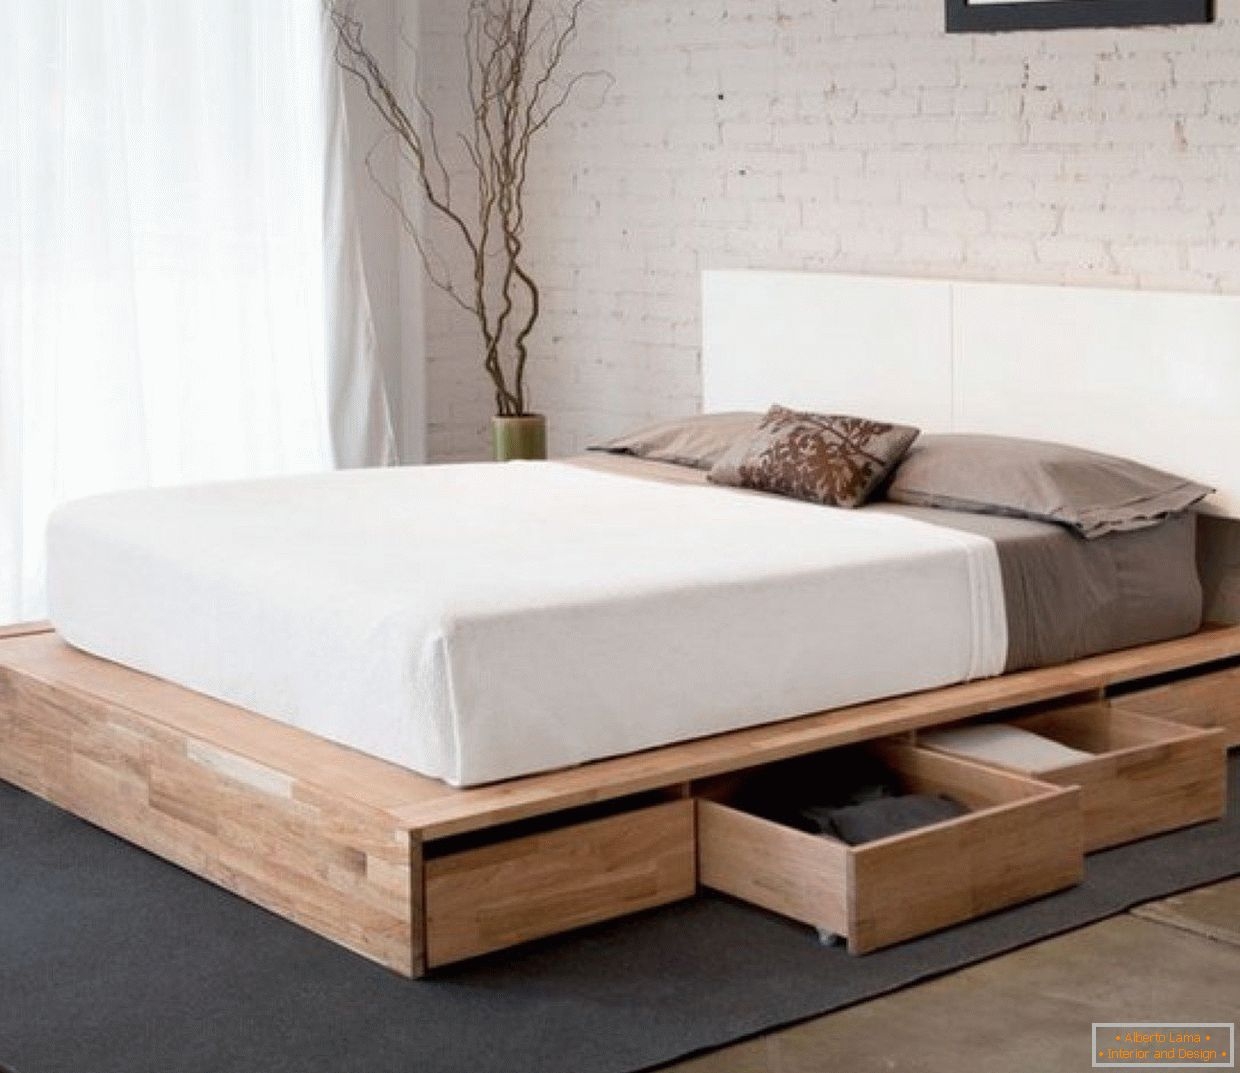 Bed With Drawers Underneath Visualhunt, Single Bed Frame With Drawers Underneath